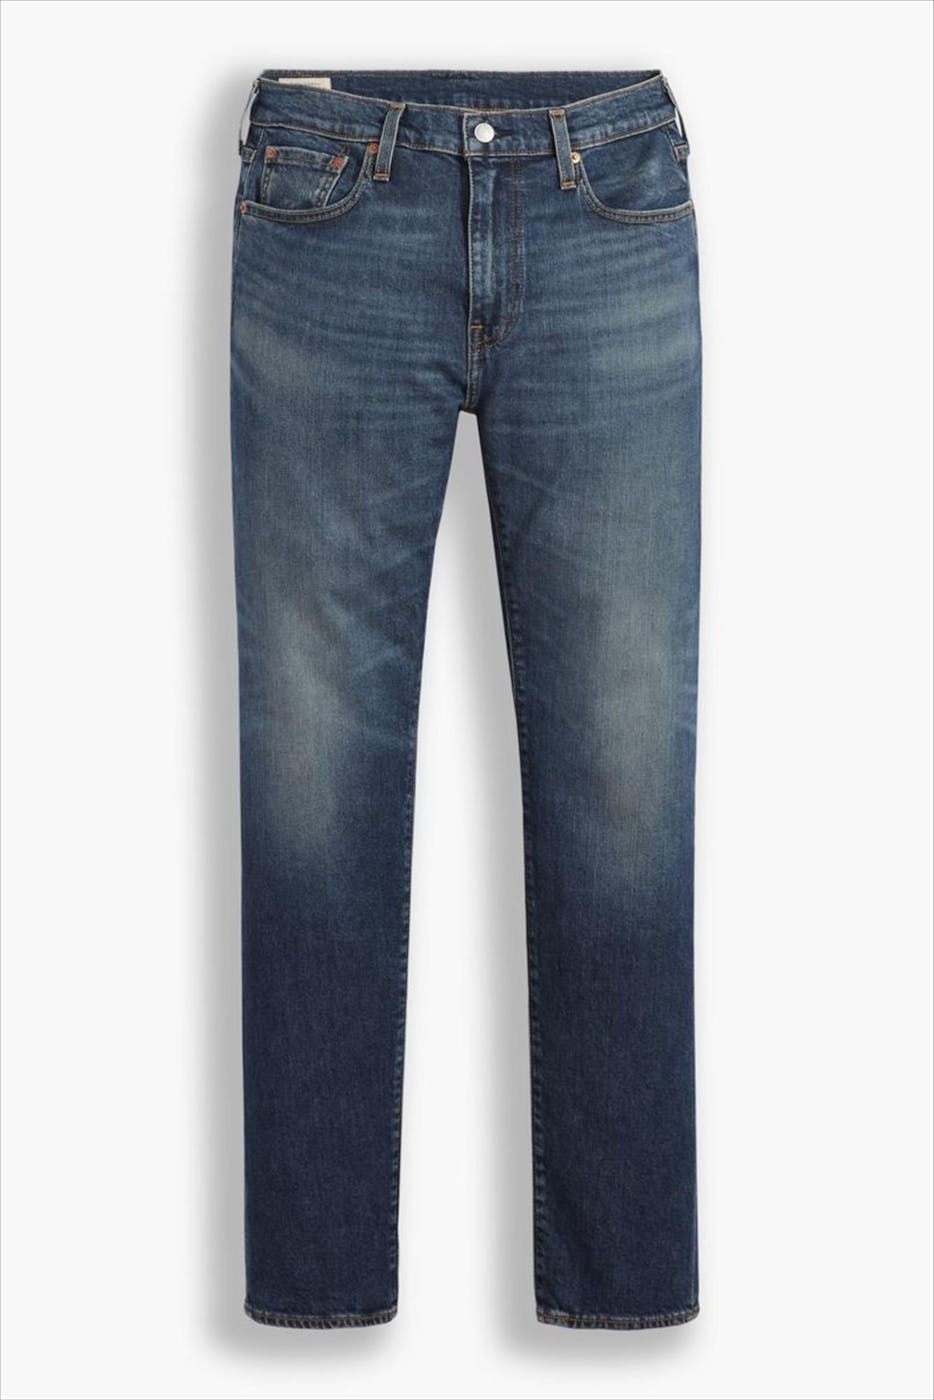 Levi's - Blauwe 502 straight tapered jeans